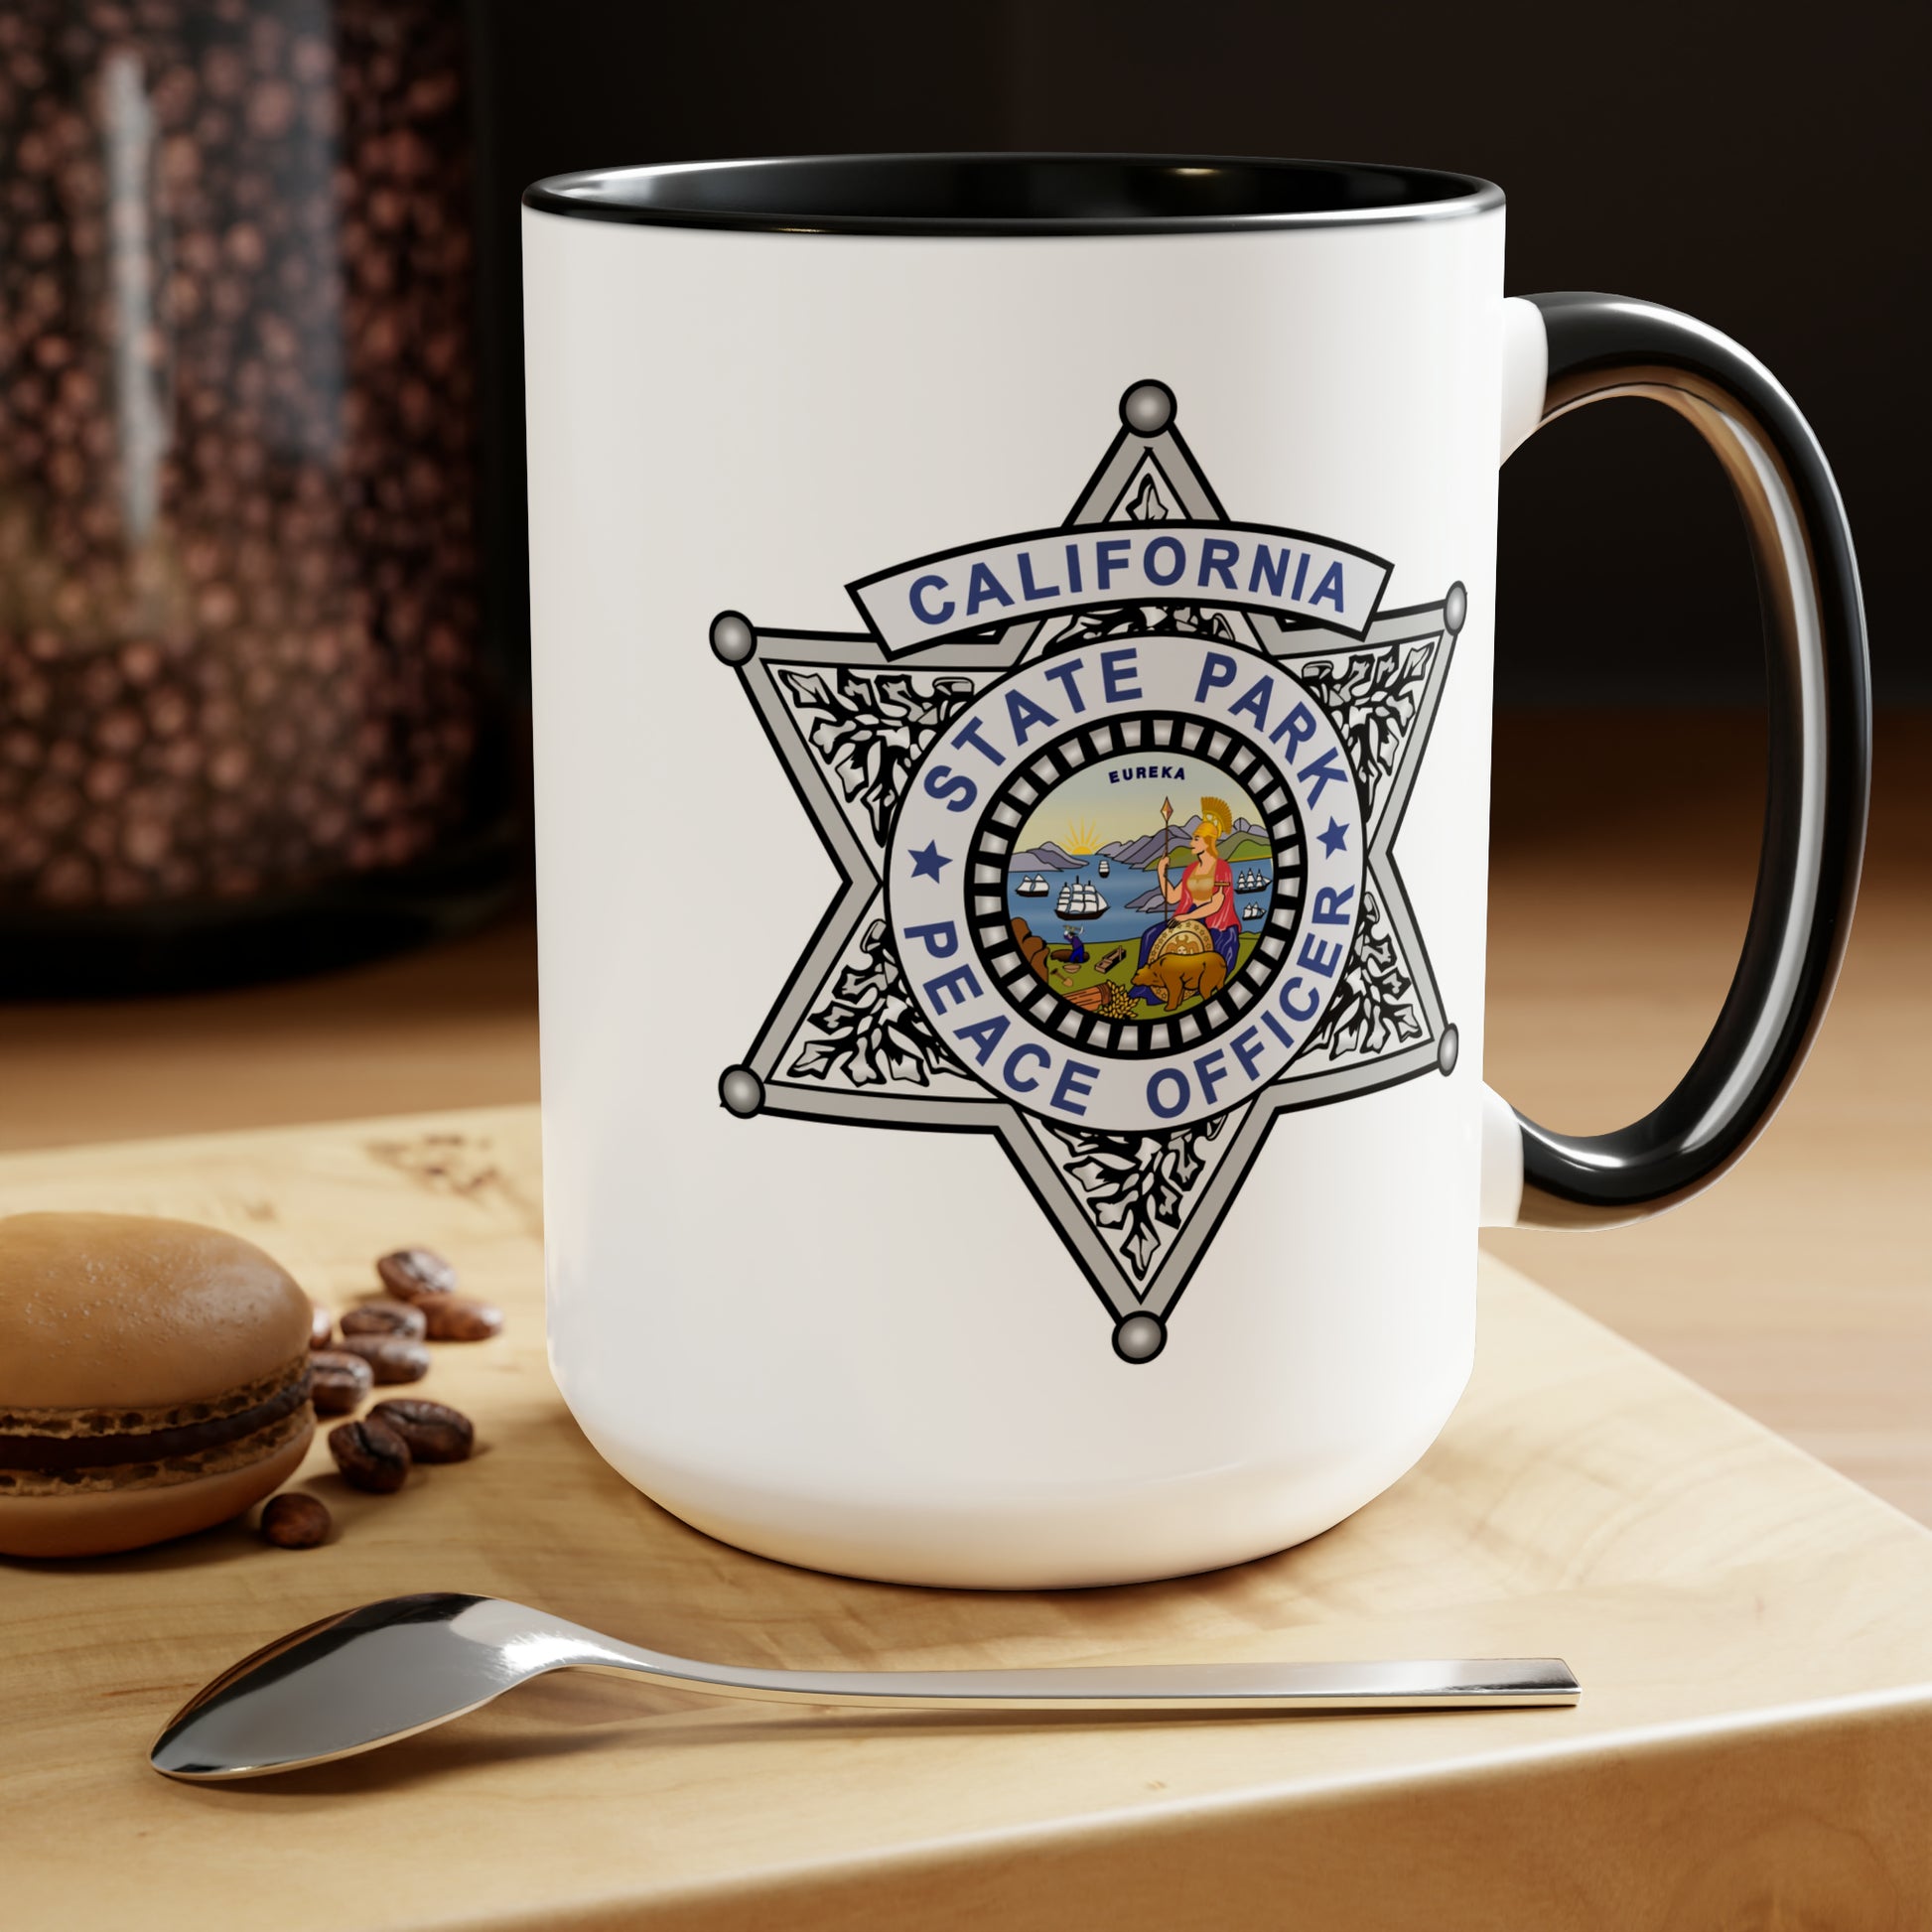 California State Park Peace Officer Coffee Mug - Double Sided Black Accent White Ceramic 15oz by TheGlassyLass.com